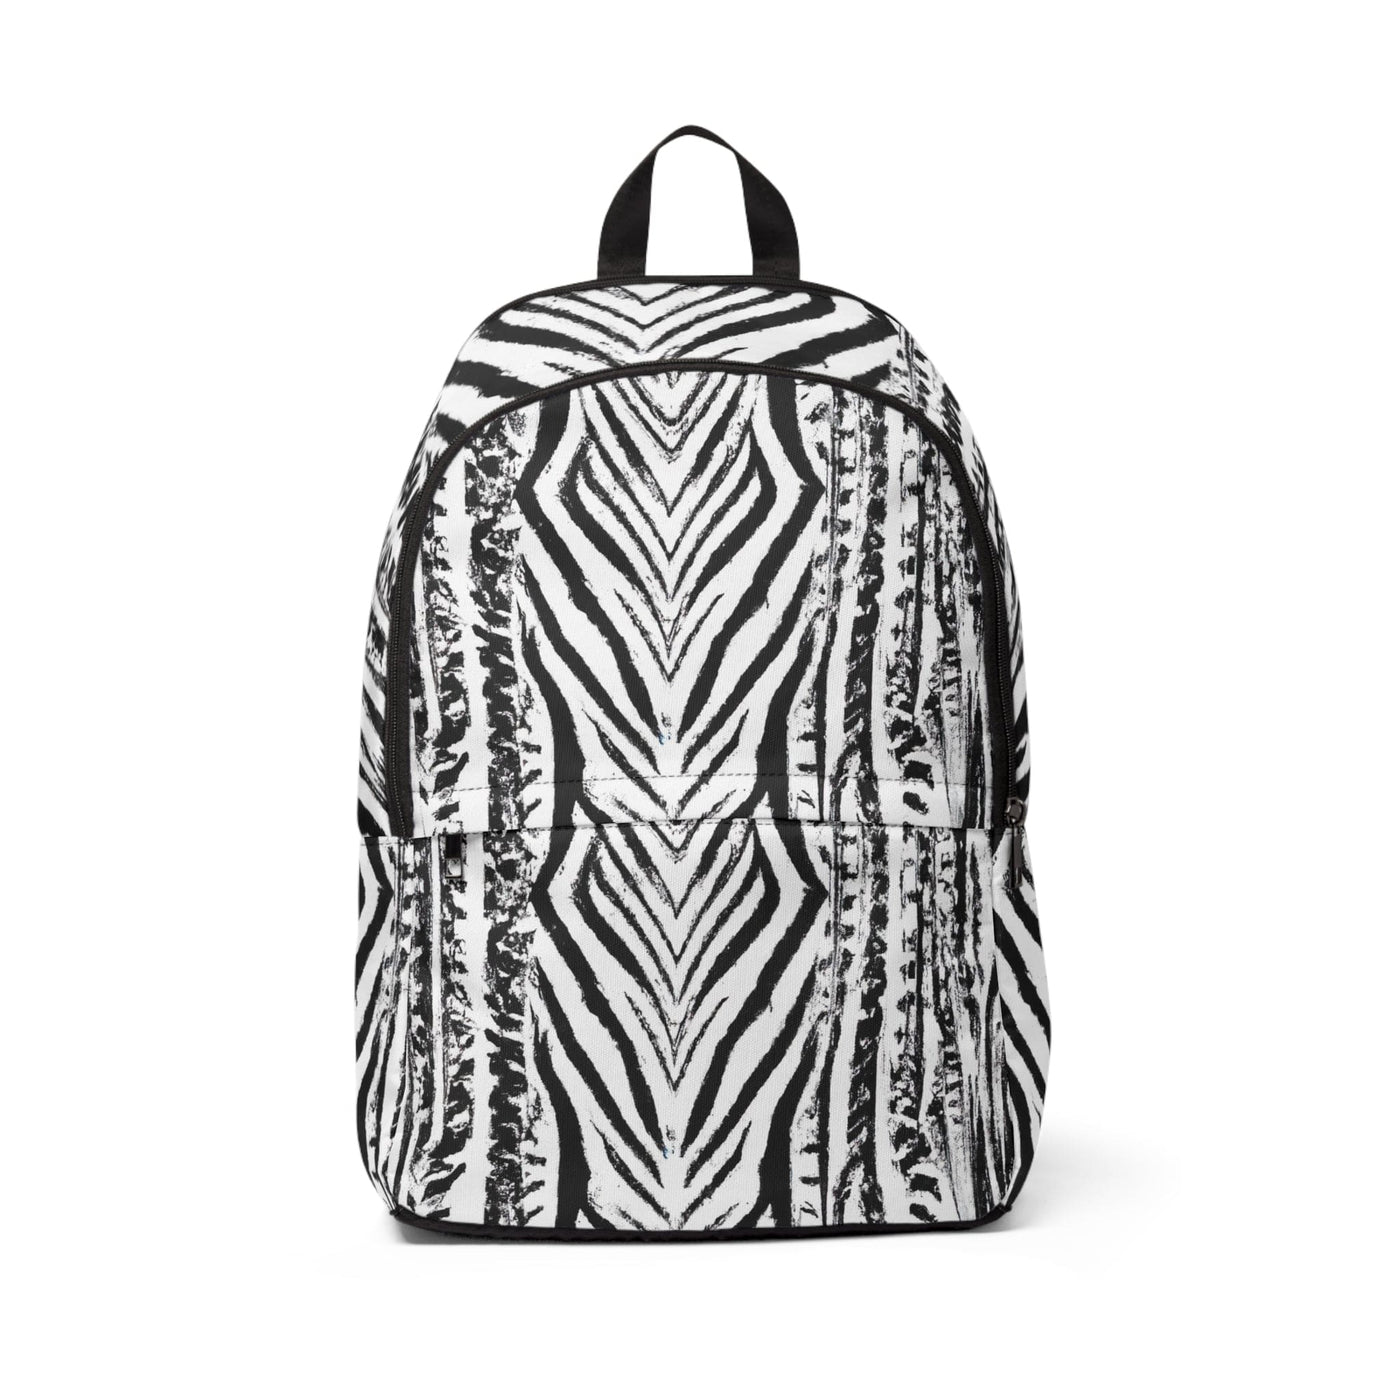 Fashion Backpack Waterproof Black And White Native Pattern - Bags